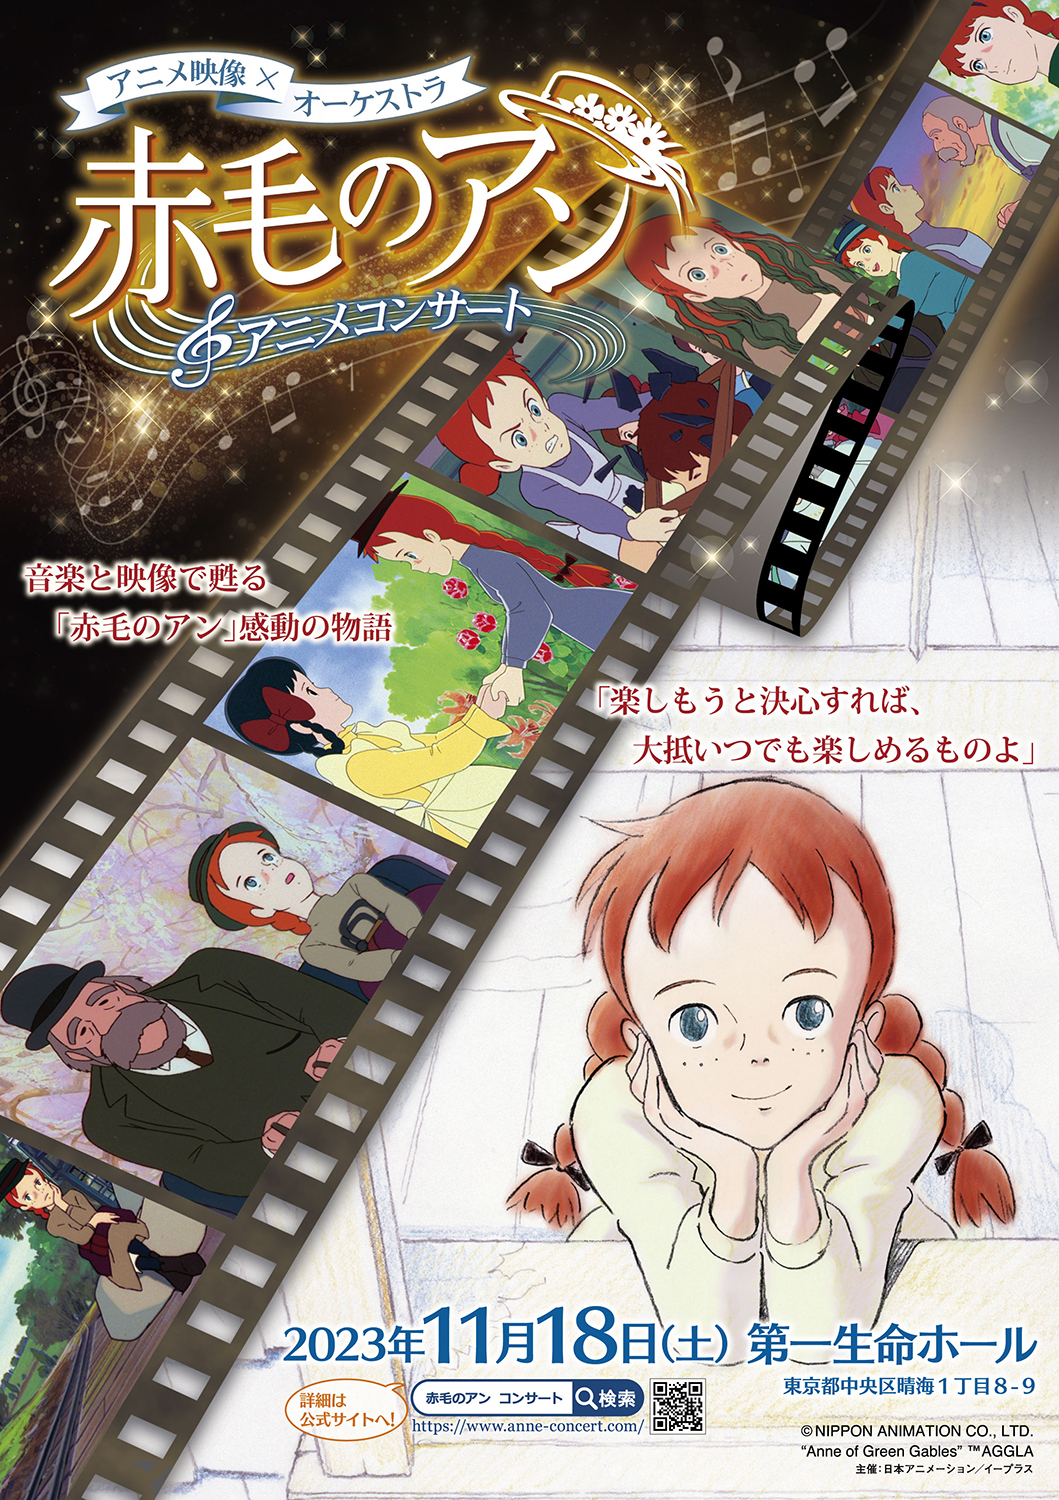  （c）NIPPON ANIMATION CO., LTD. “Anne of Geen Gables” ™AGGLA